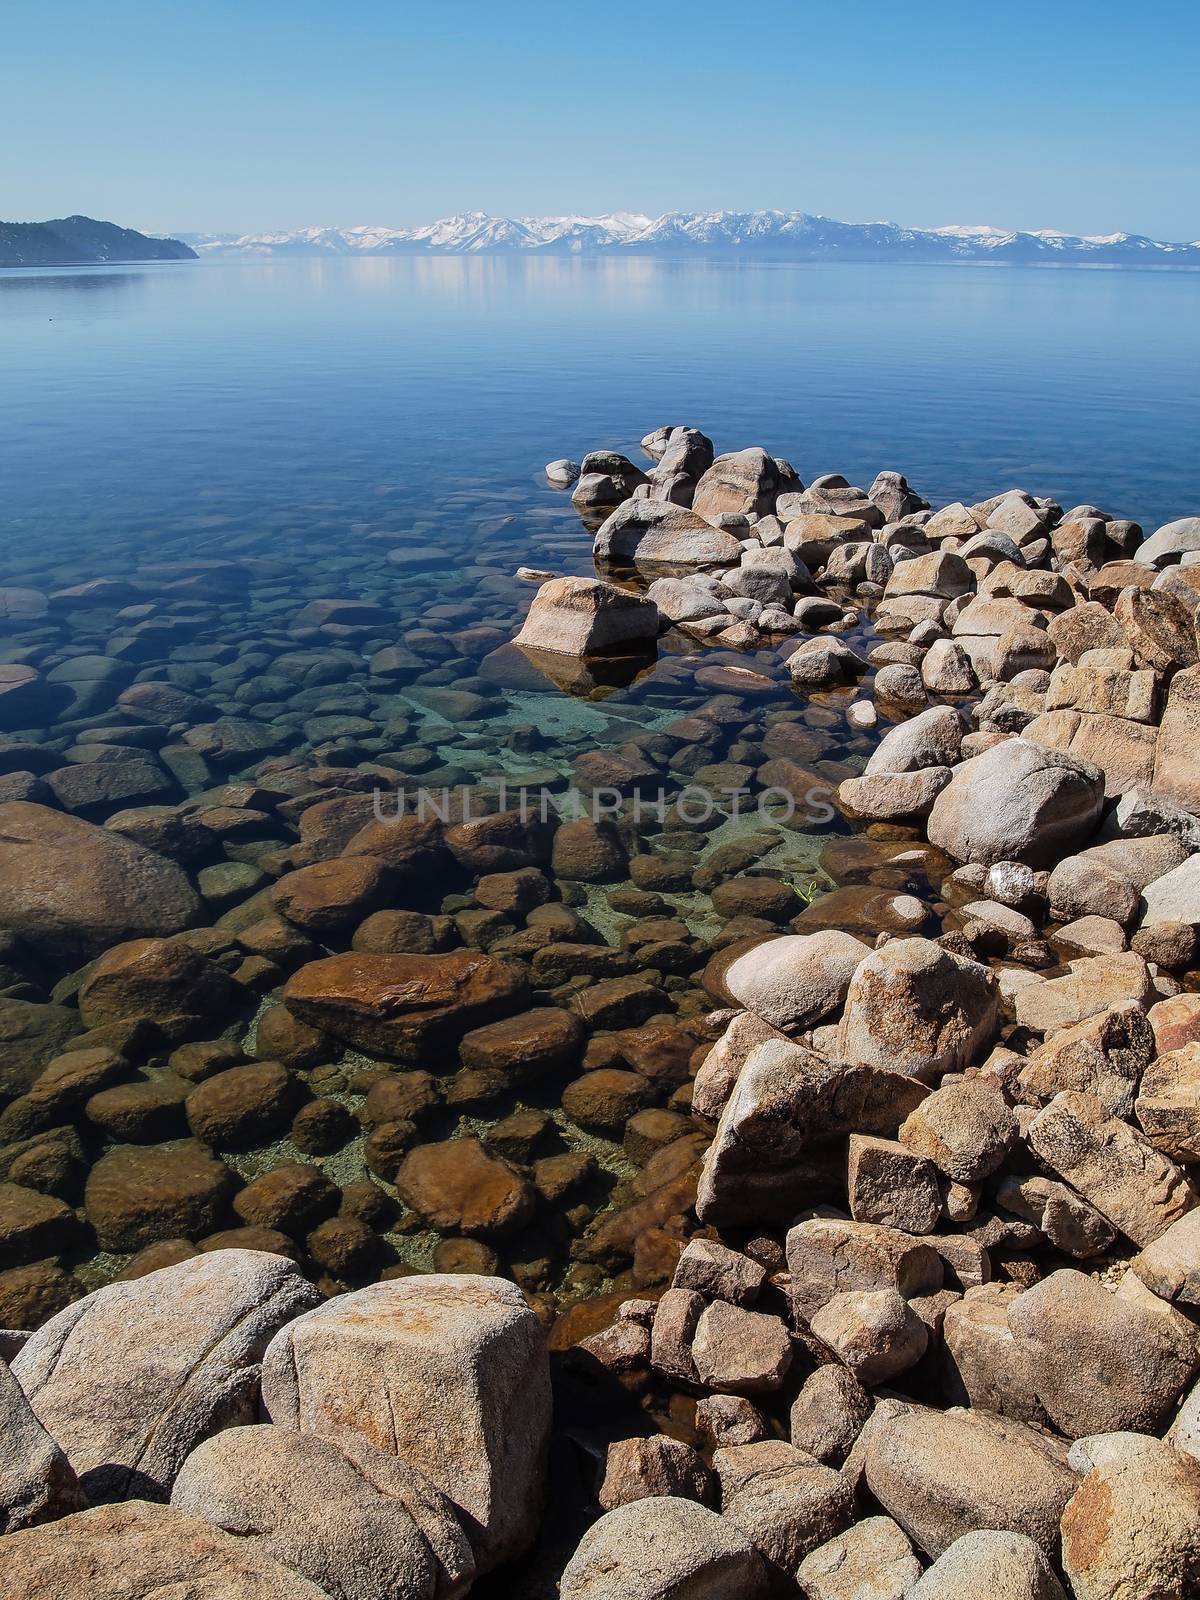 Scenic view of beautiful Lake Tahoe in Spring, landscape of the United States of America, clear water, nice sky, stone island, tree, fresh air and snow mountains